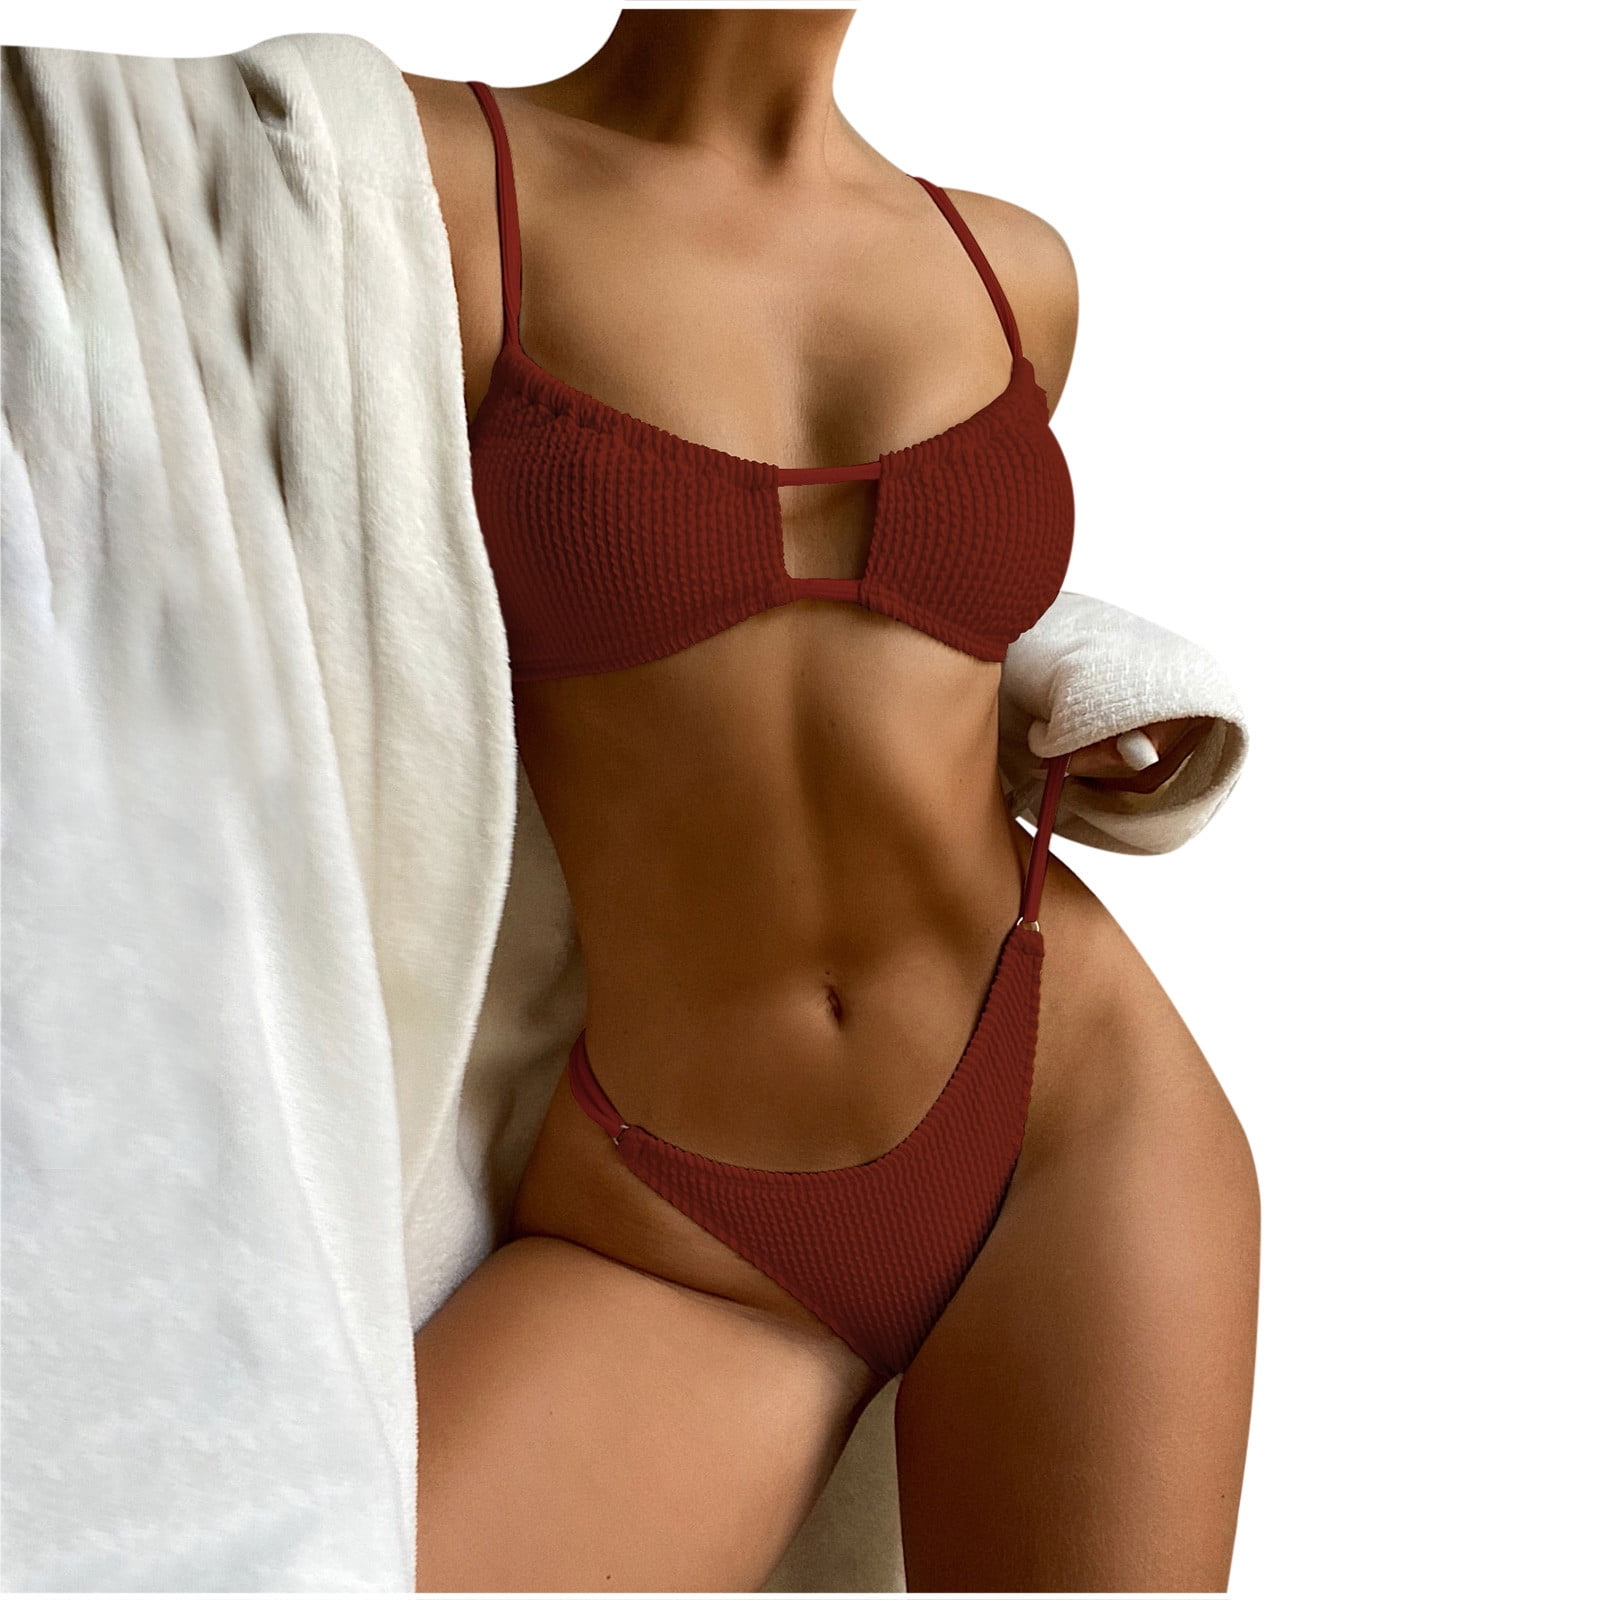 Tawop Bathing Suit Tops For Women Large Bust Women Sexy Solid Strap Padded  Push Up One Piece Swimsuit Brown Size Xxl 